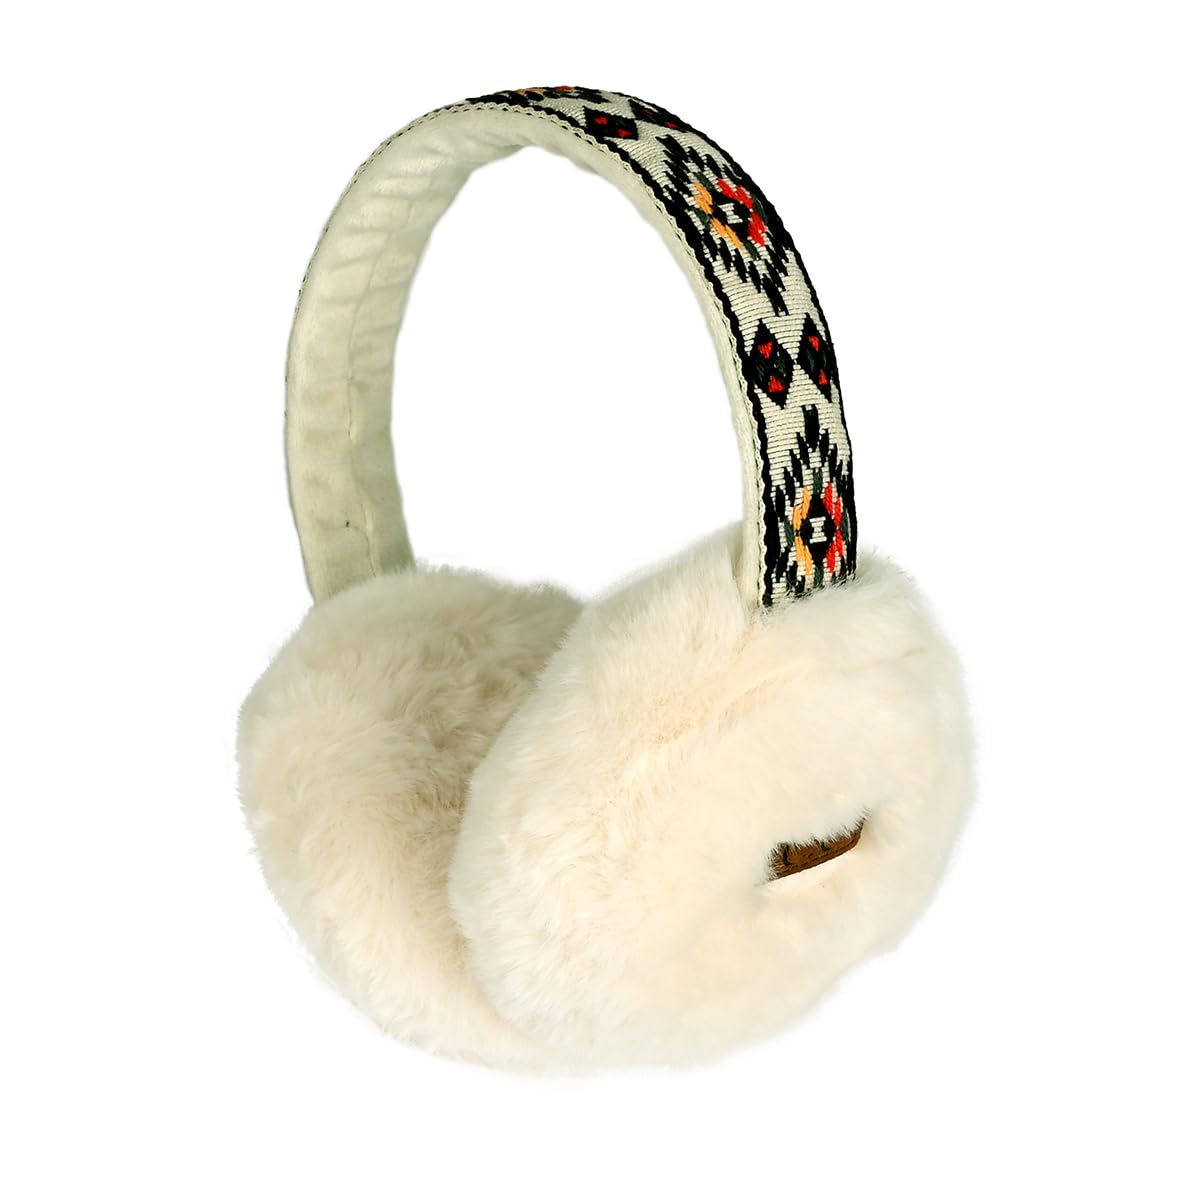 Fuzzy Adjustable Ear Muffs by Funky Junque